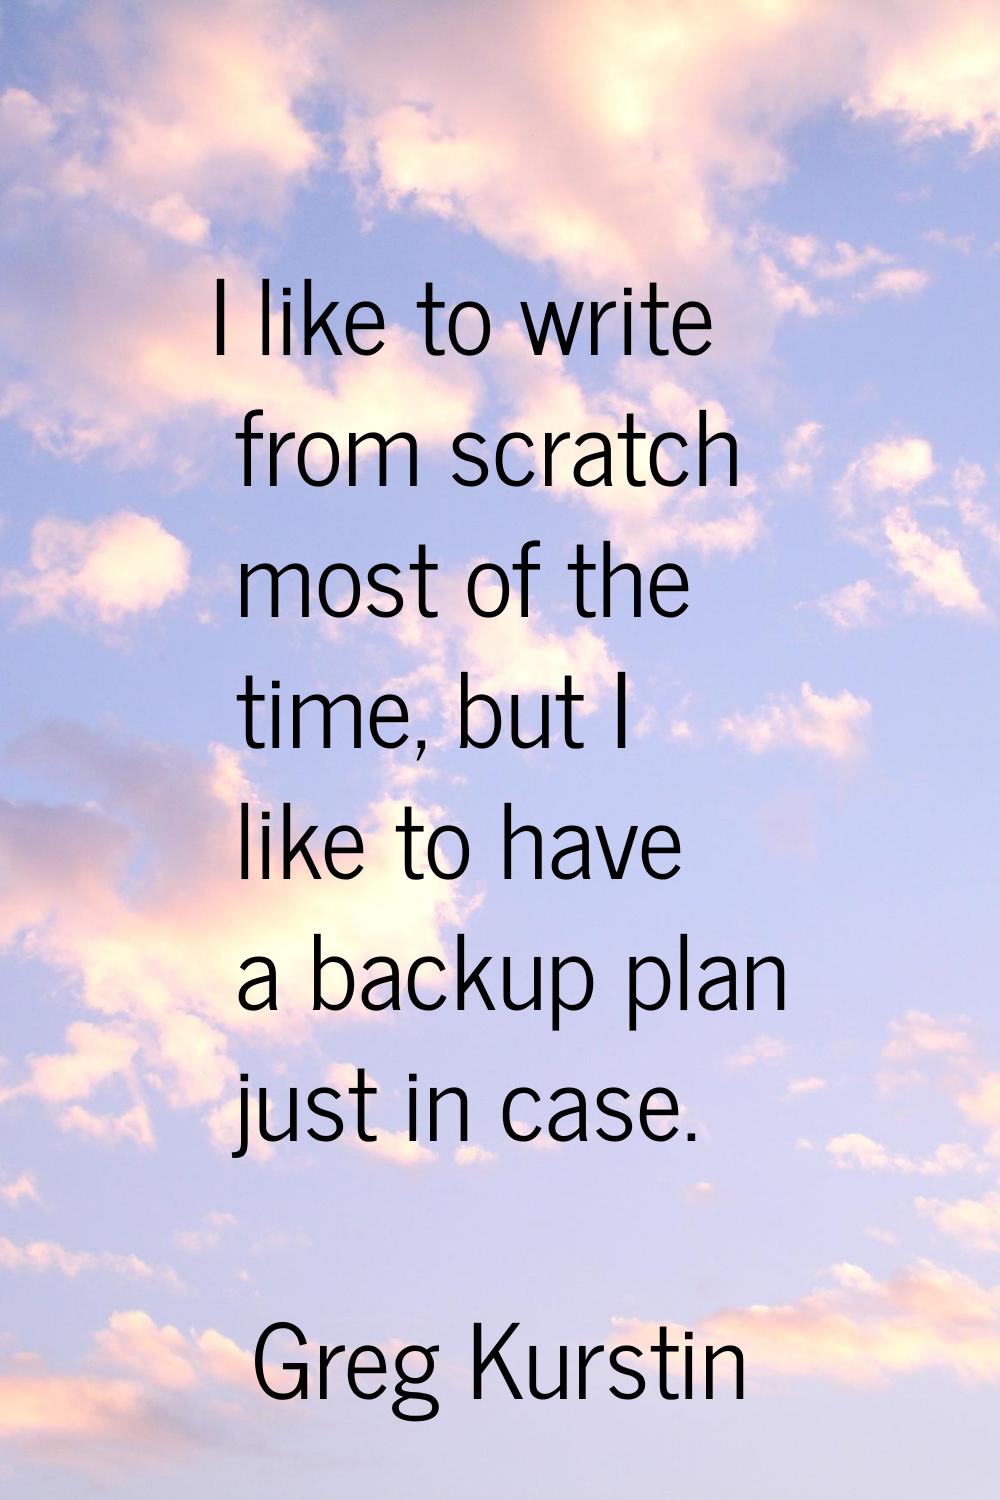 I like to write from scratch most of the time, but I like to have a backup plan just in case.